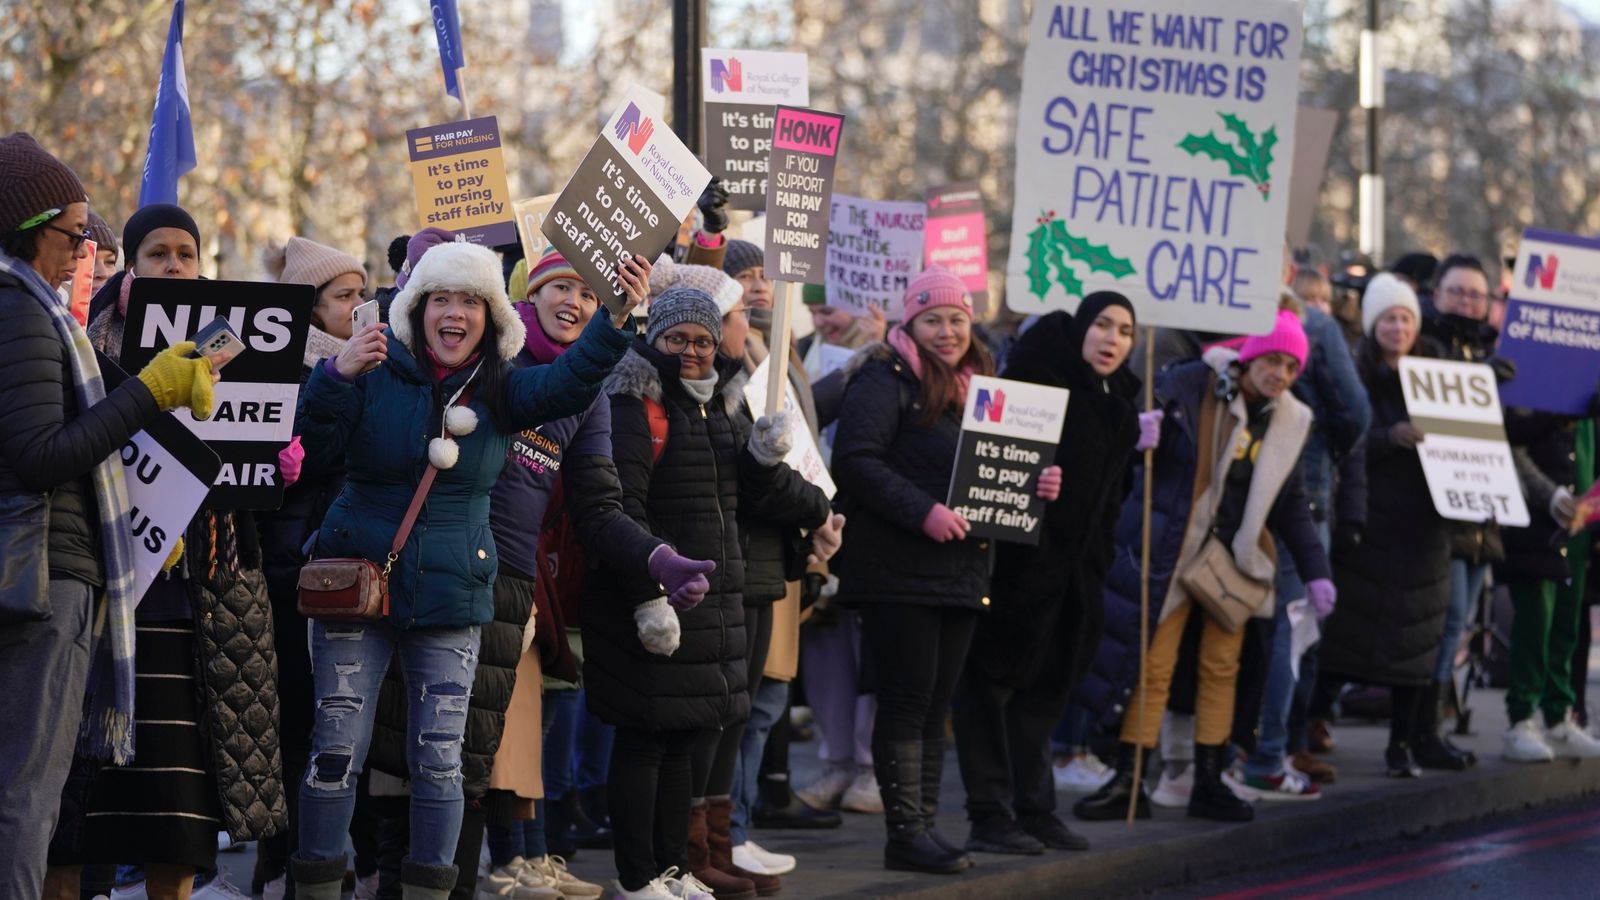 Nurses say they are open to calling off strikes if government discusses this year's pay - but ministers are refusing to